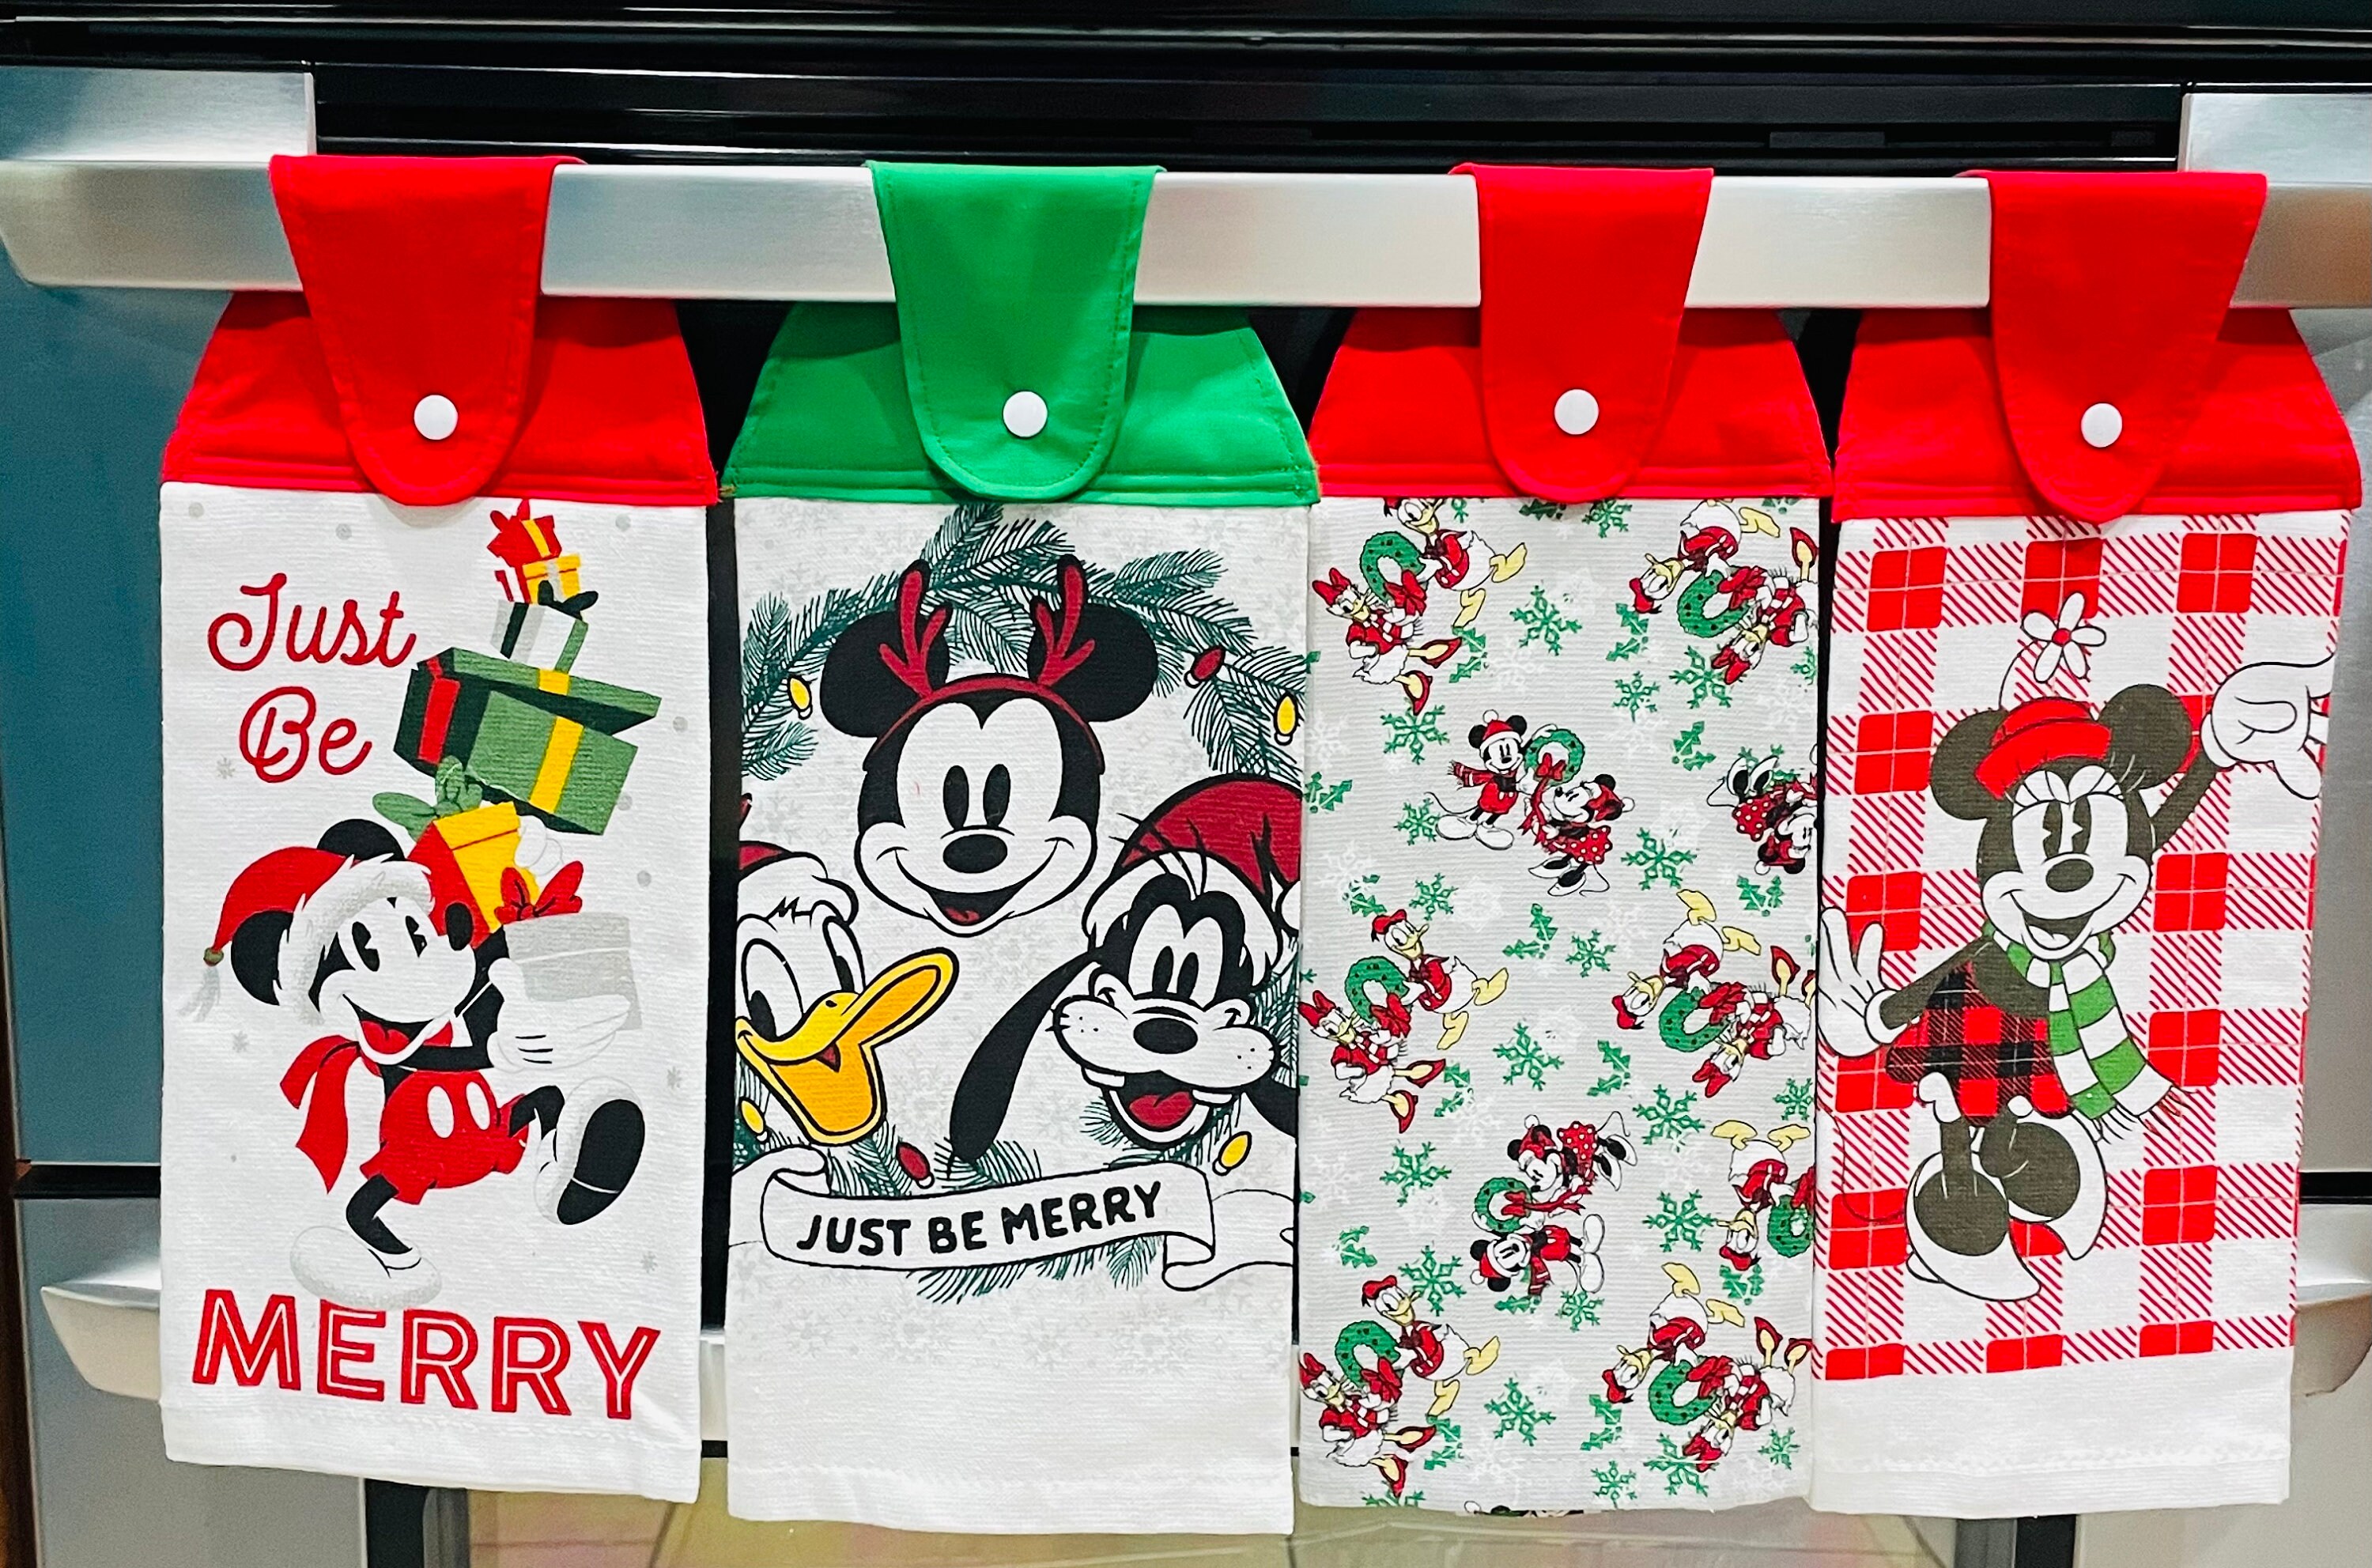 His and Hers Disney Hand Towels, Mickey Ears, Disney Wedding, Bridal Shower  Gift, Engagement, Disney Vacation, Disney Cruise